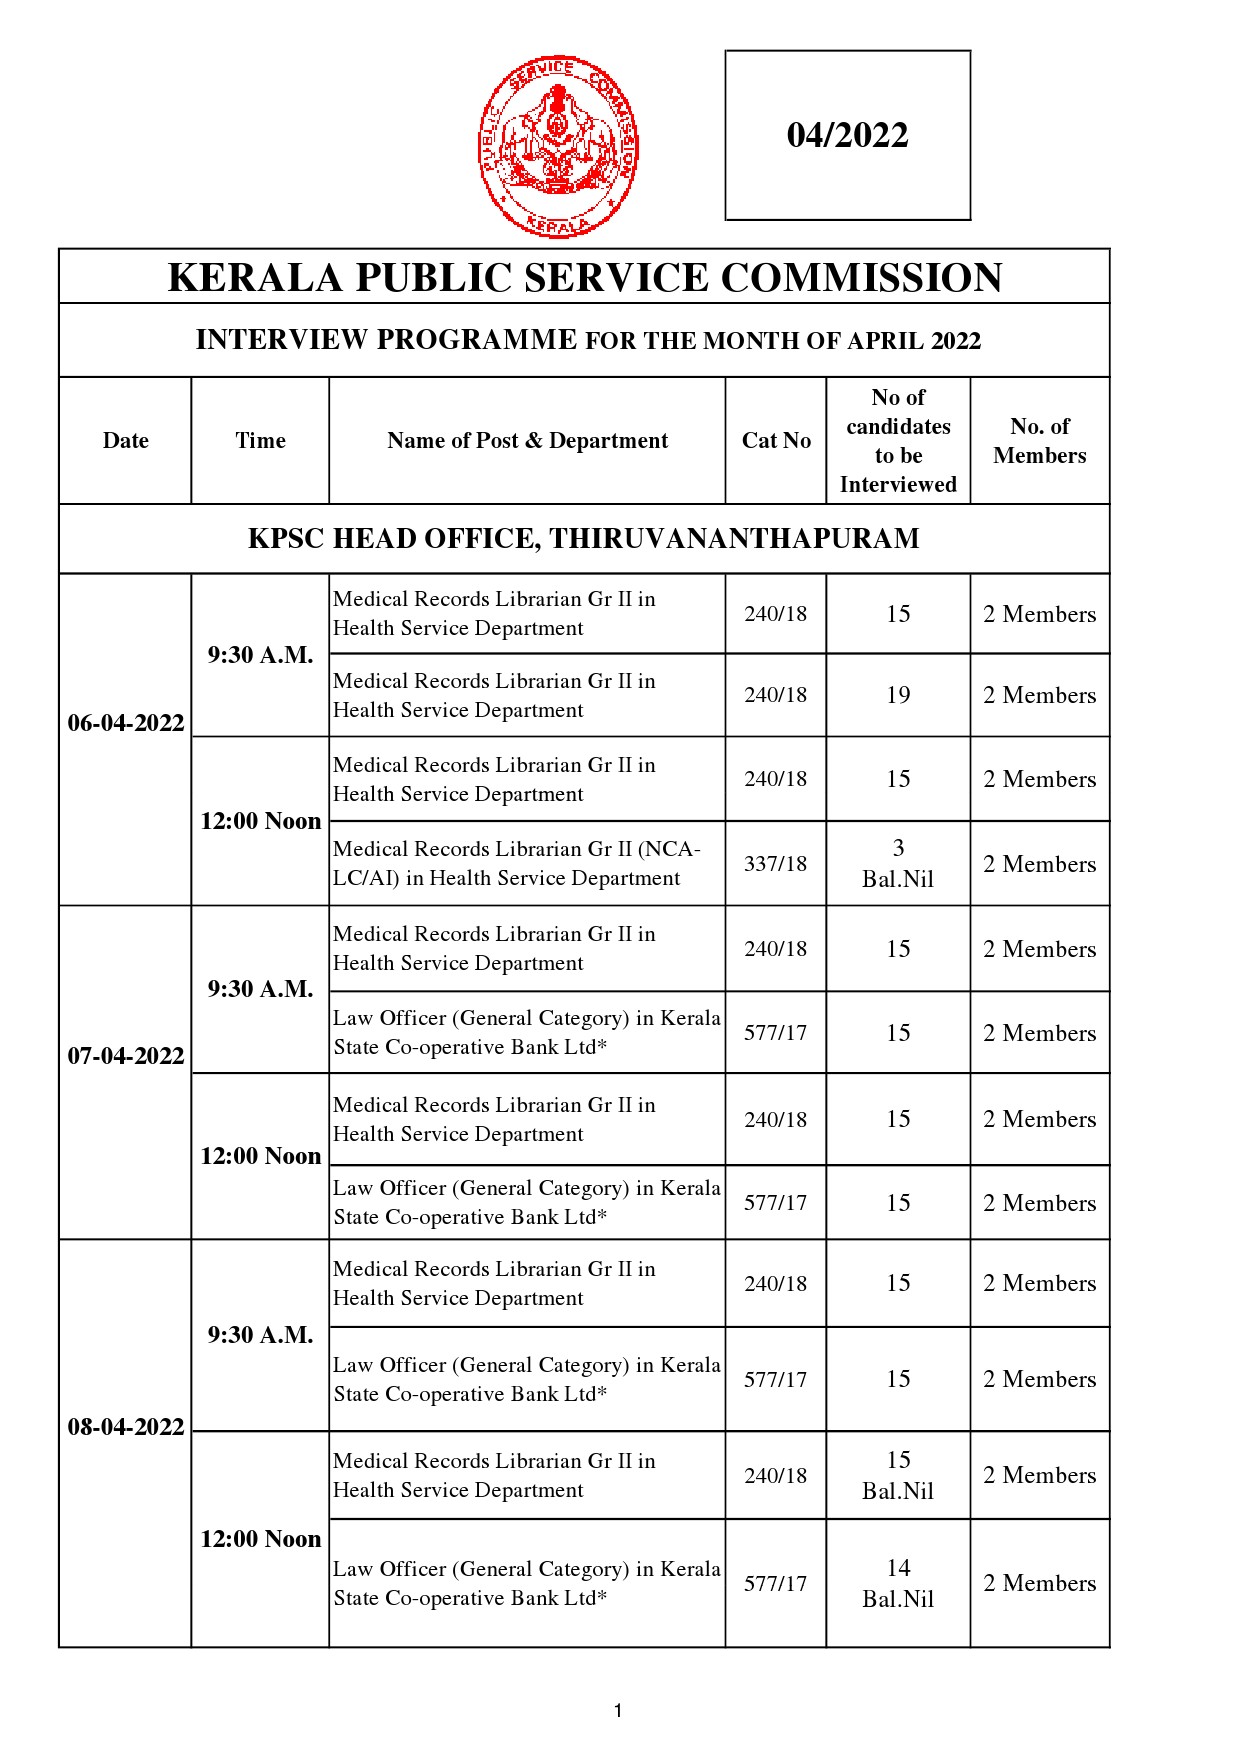 KPSC Interview Programme for the Month of April 2022 - Notification Image 1